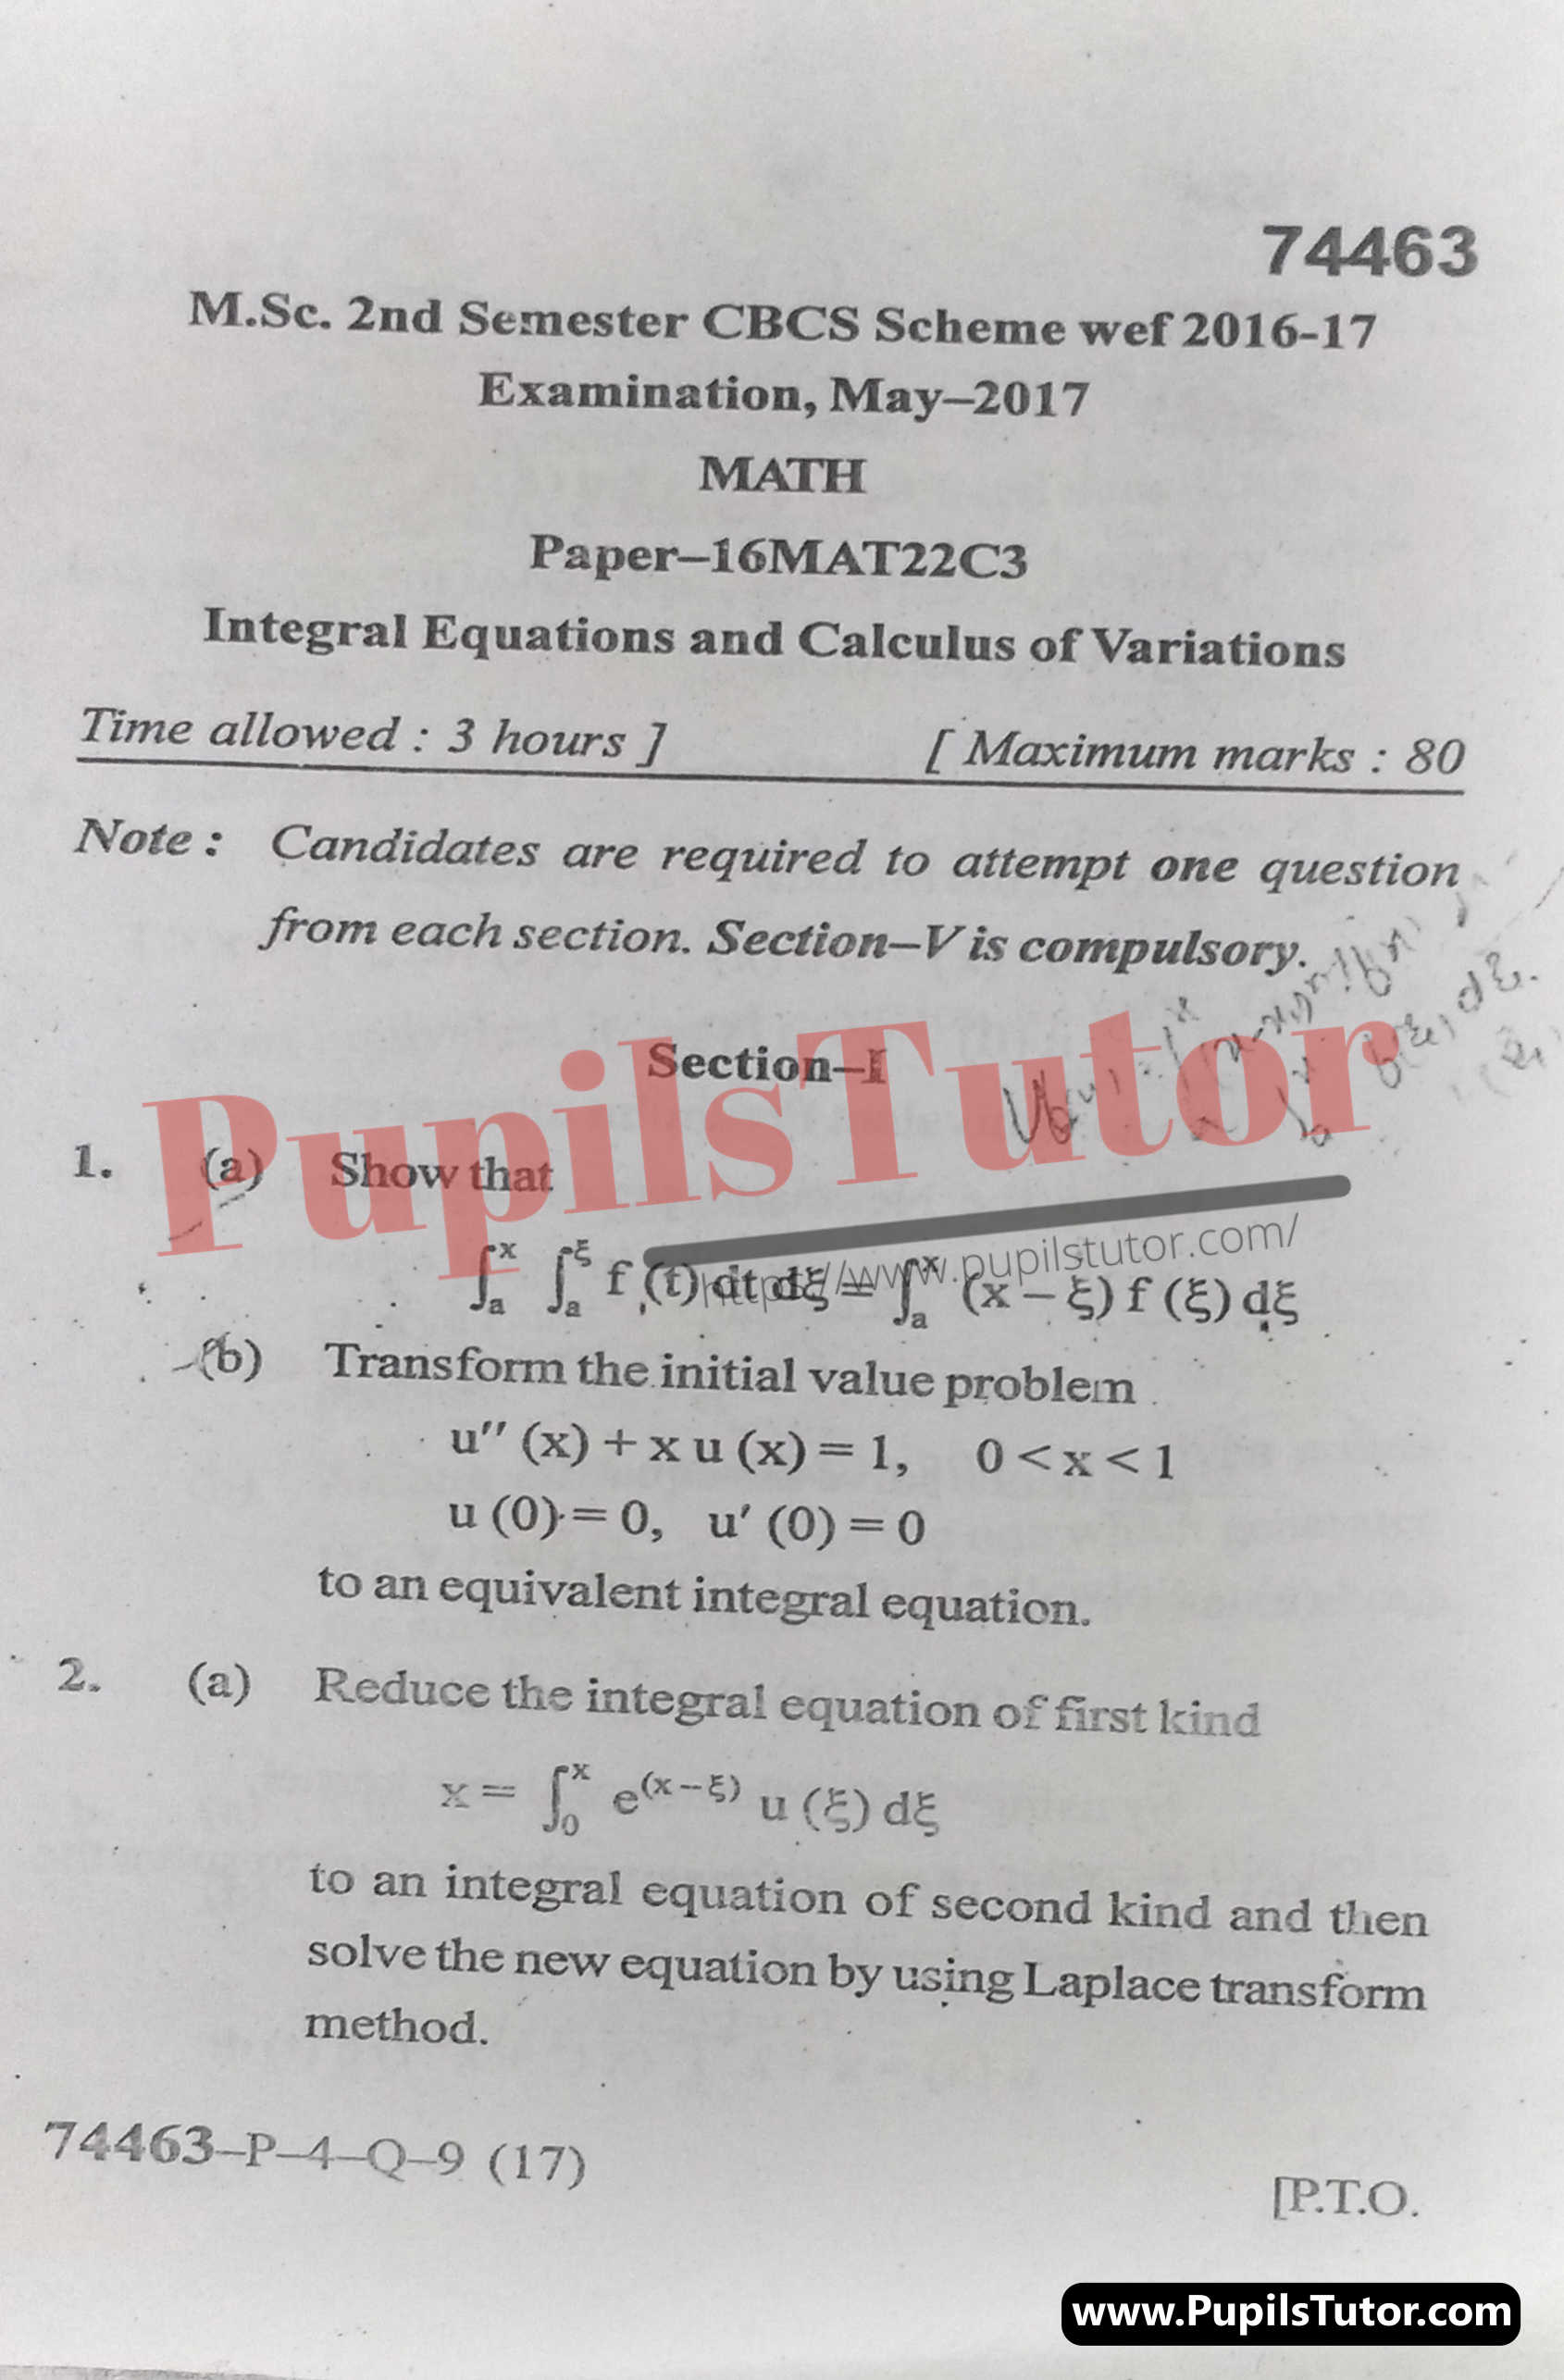 MDU (Maharshi Dayanand University, Rohtak Haryana) MSc Mathematics CBCS Scheme Second Semester Previous Year Integral Equations And Calculus Of Variations Question Paper For May, 2017 Exam (Question Paper Page 1) - pupilstutor.com